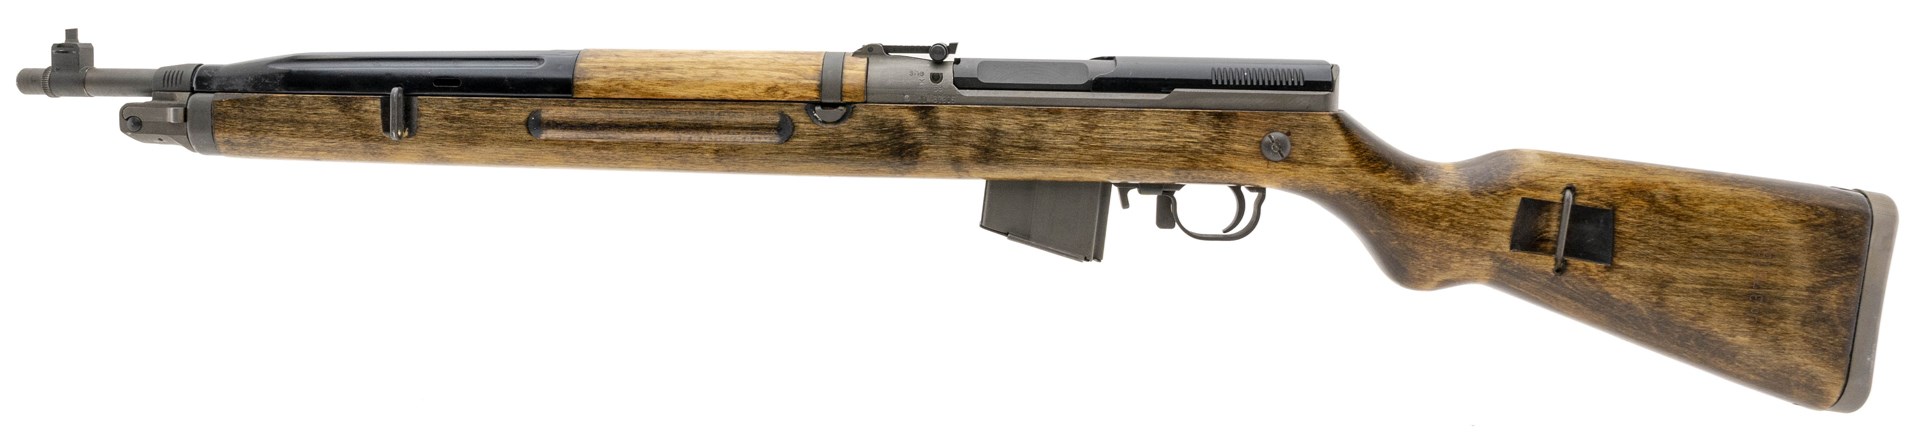 Left-side view of a vz. 52/57 rifle in 7.62×39mm that was made in 1959. Image courtesy of Jeff Hallinan of Collectors Firearms in Houston, Texas.